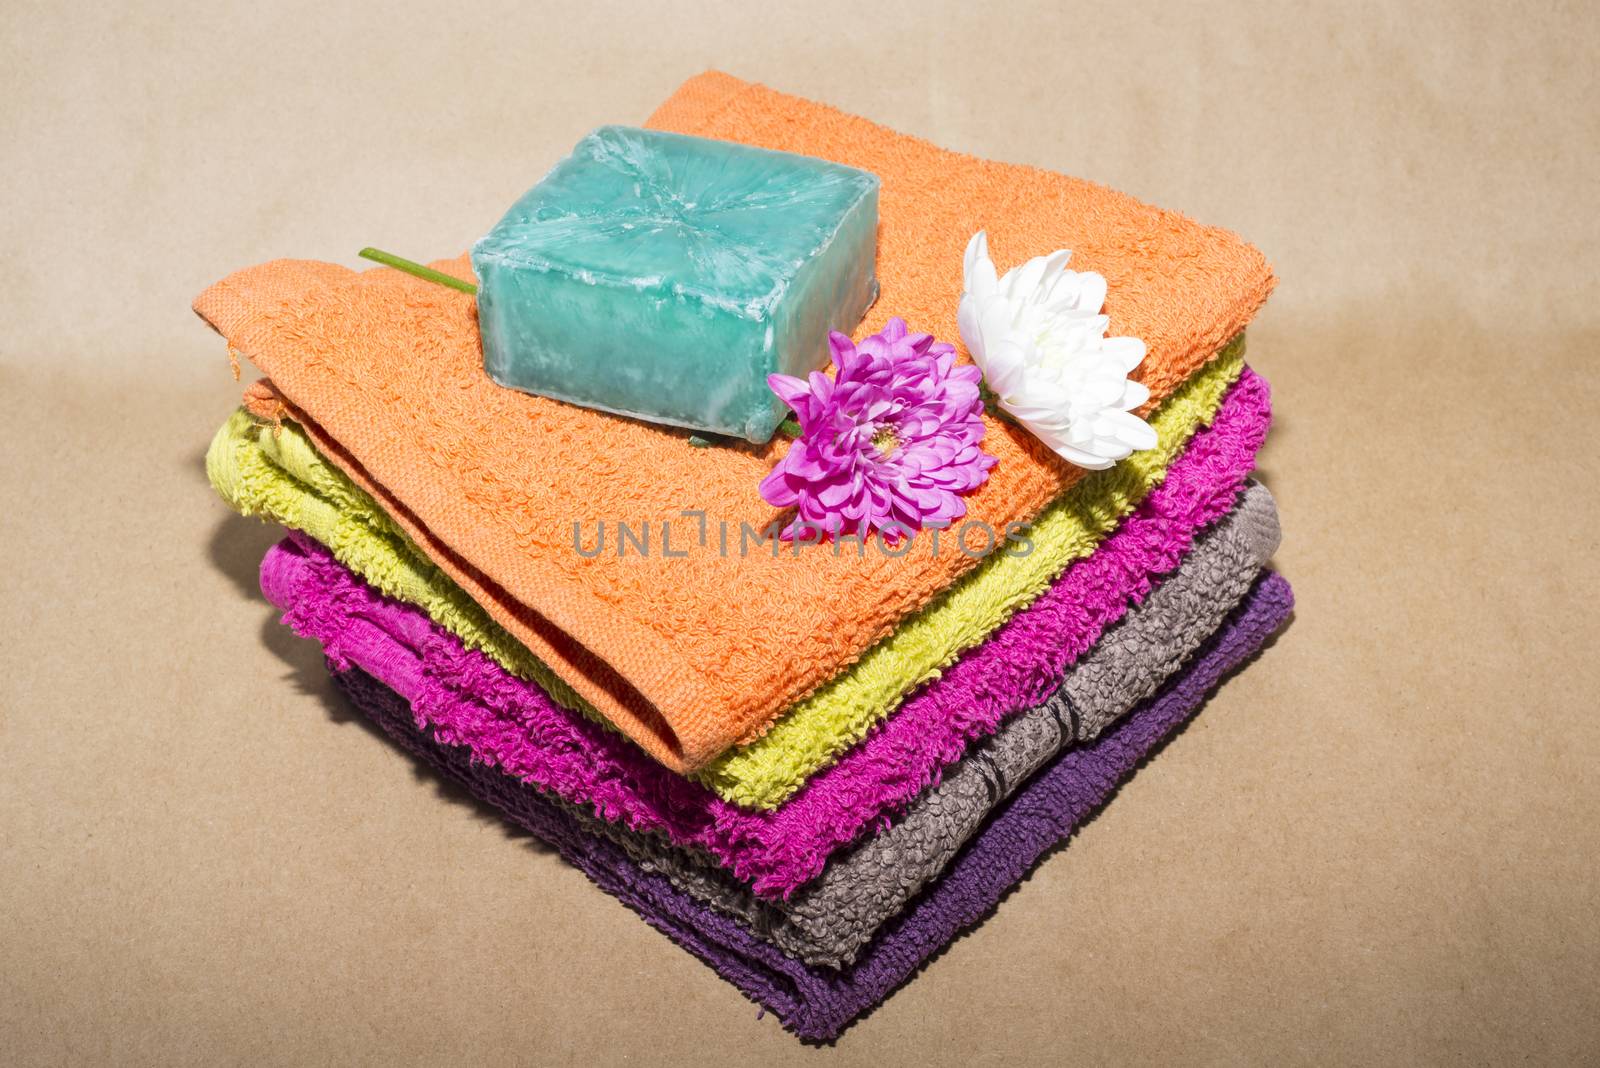 soap bar on top of facecloths off various shades with flowers